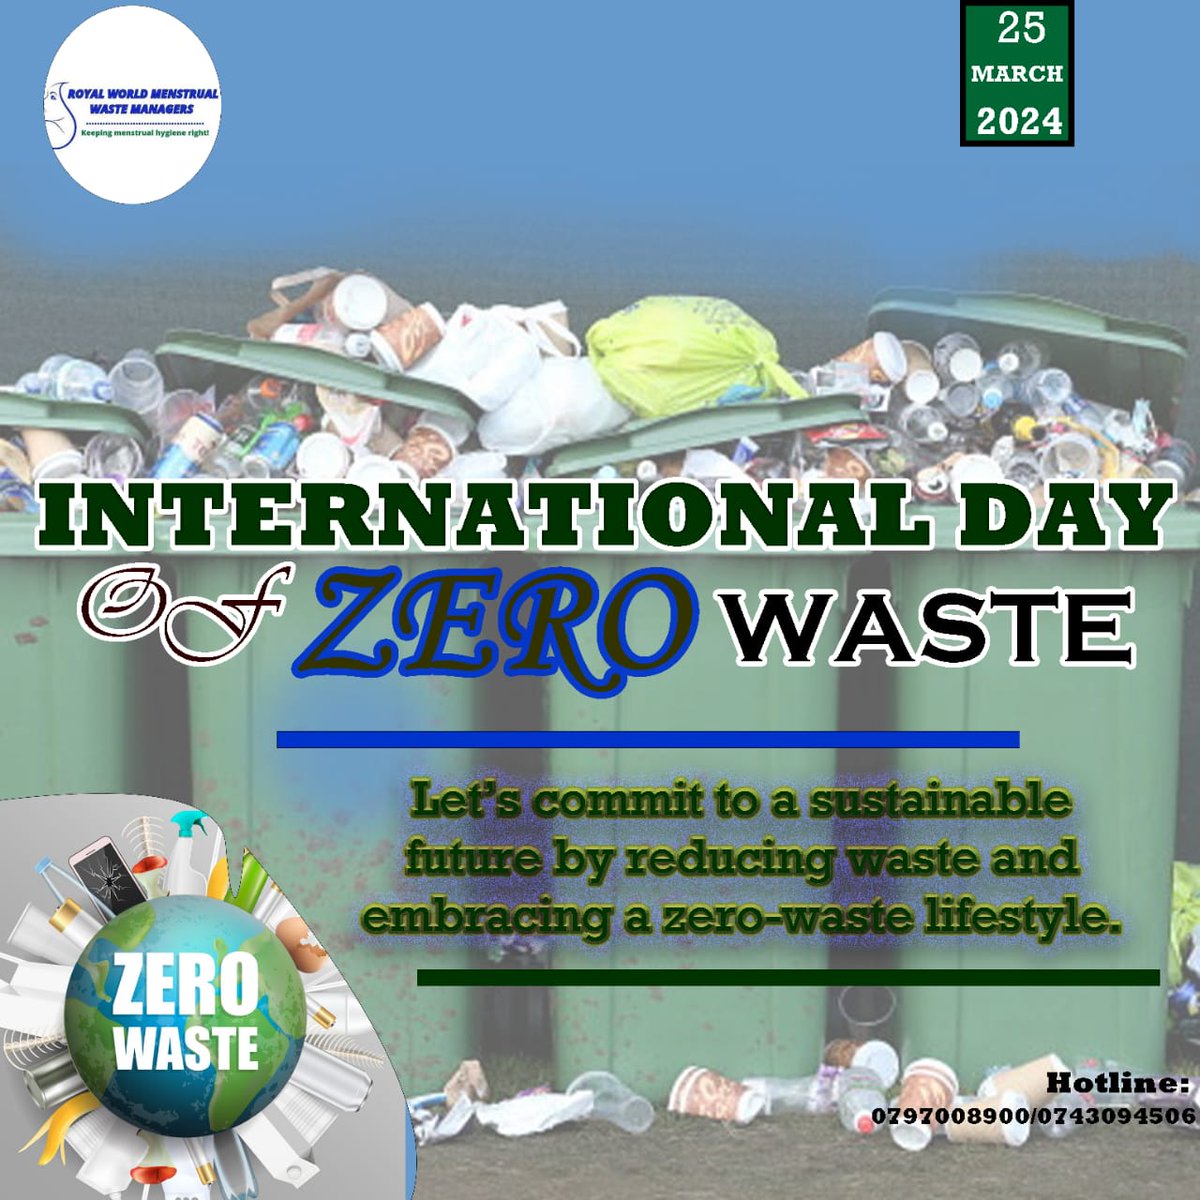 Let's commit to a sustainable future by reducing waste and embracing a zero-waste lifestyle.#Royalworld